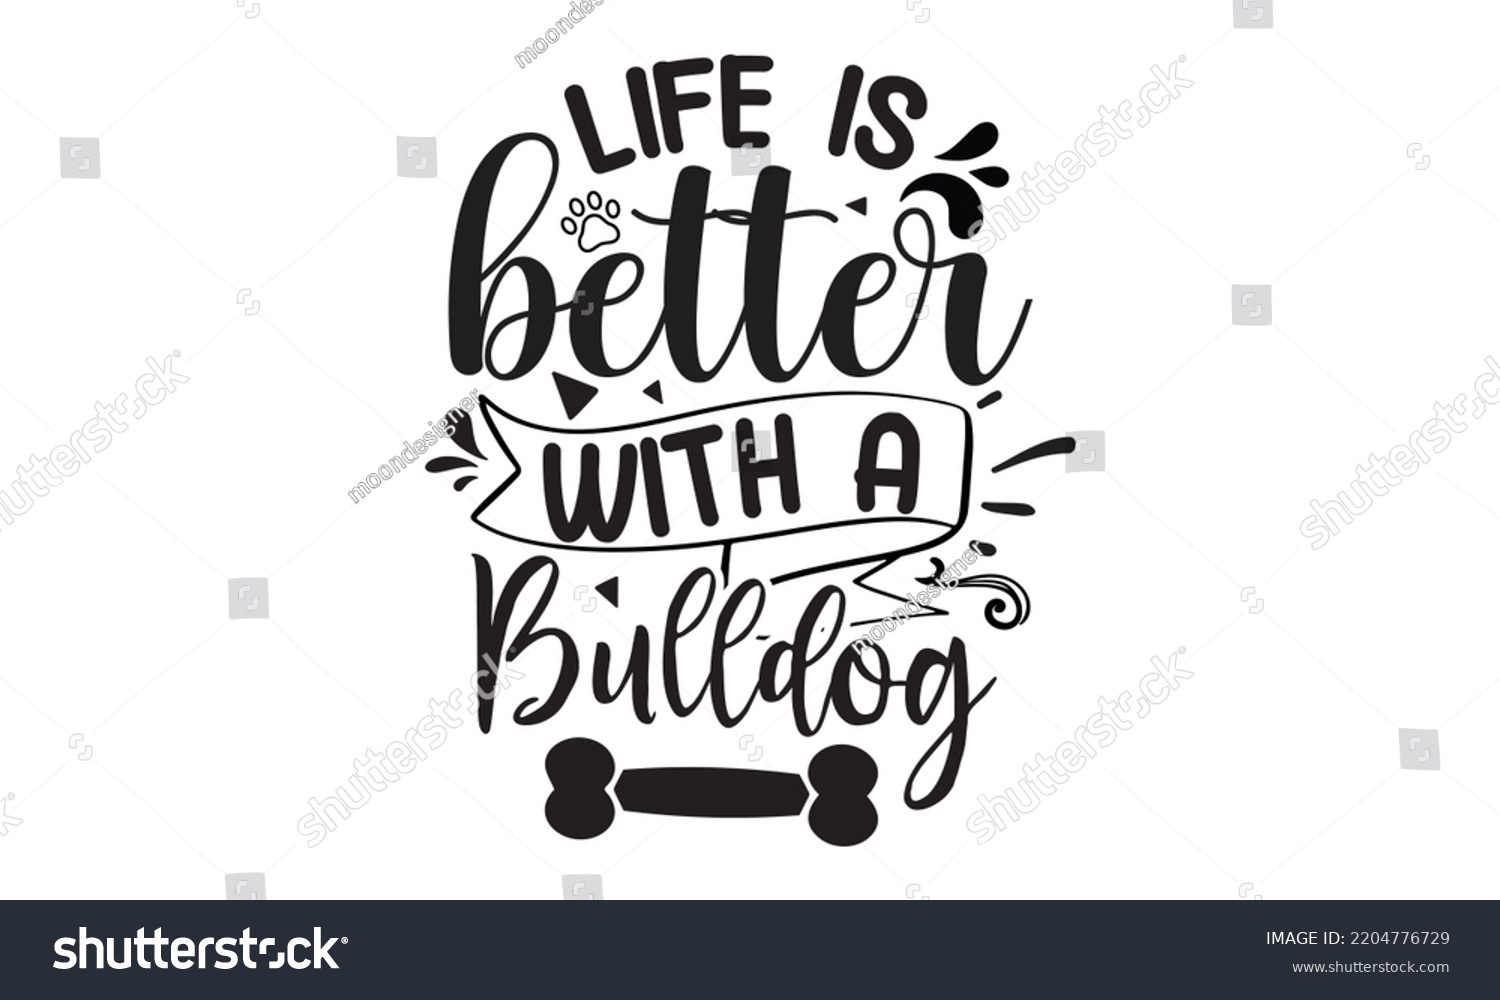 SVG of Life is better with a bulldog - Bullodog T-shirt and SVG Design,  Dog lover t shirt design gift for women, typography design, can you download this Design, svg Files for Cutting and Silhouette EPS, 10 svg